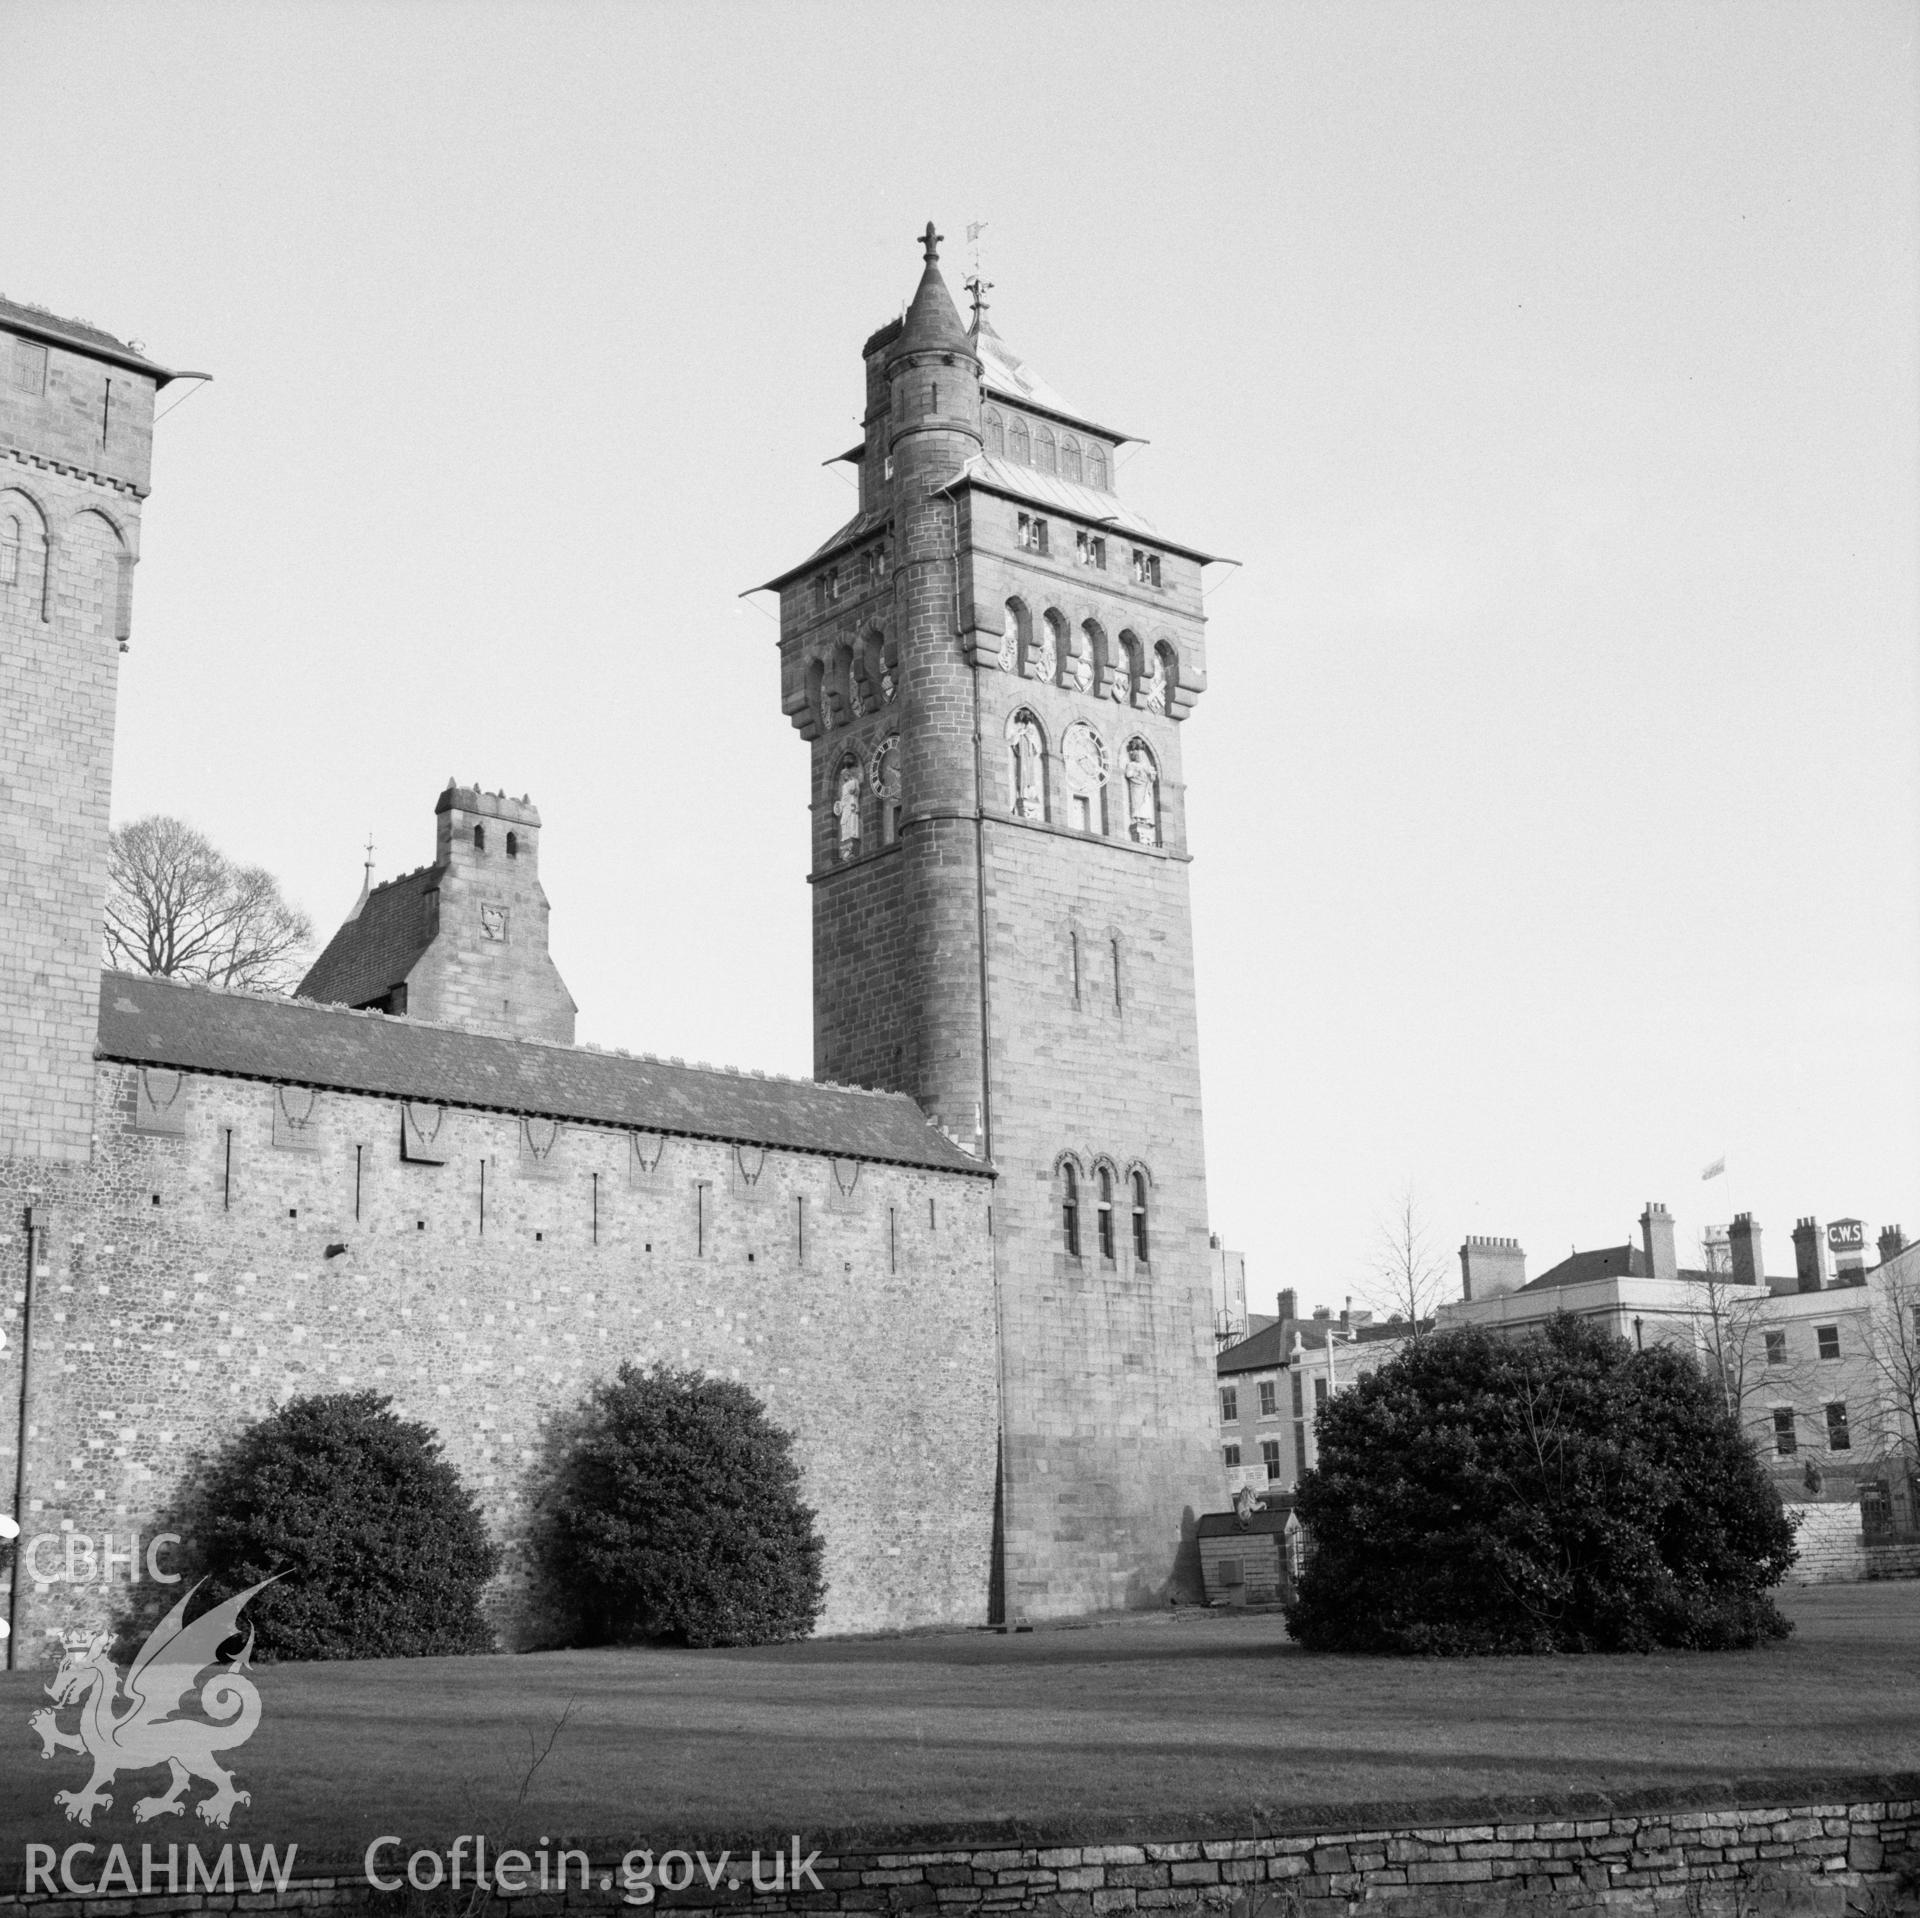 Digital copy of a black and white photograph showing Bute Tower at Cardiff Castle, taken 21st February 1966.